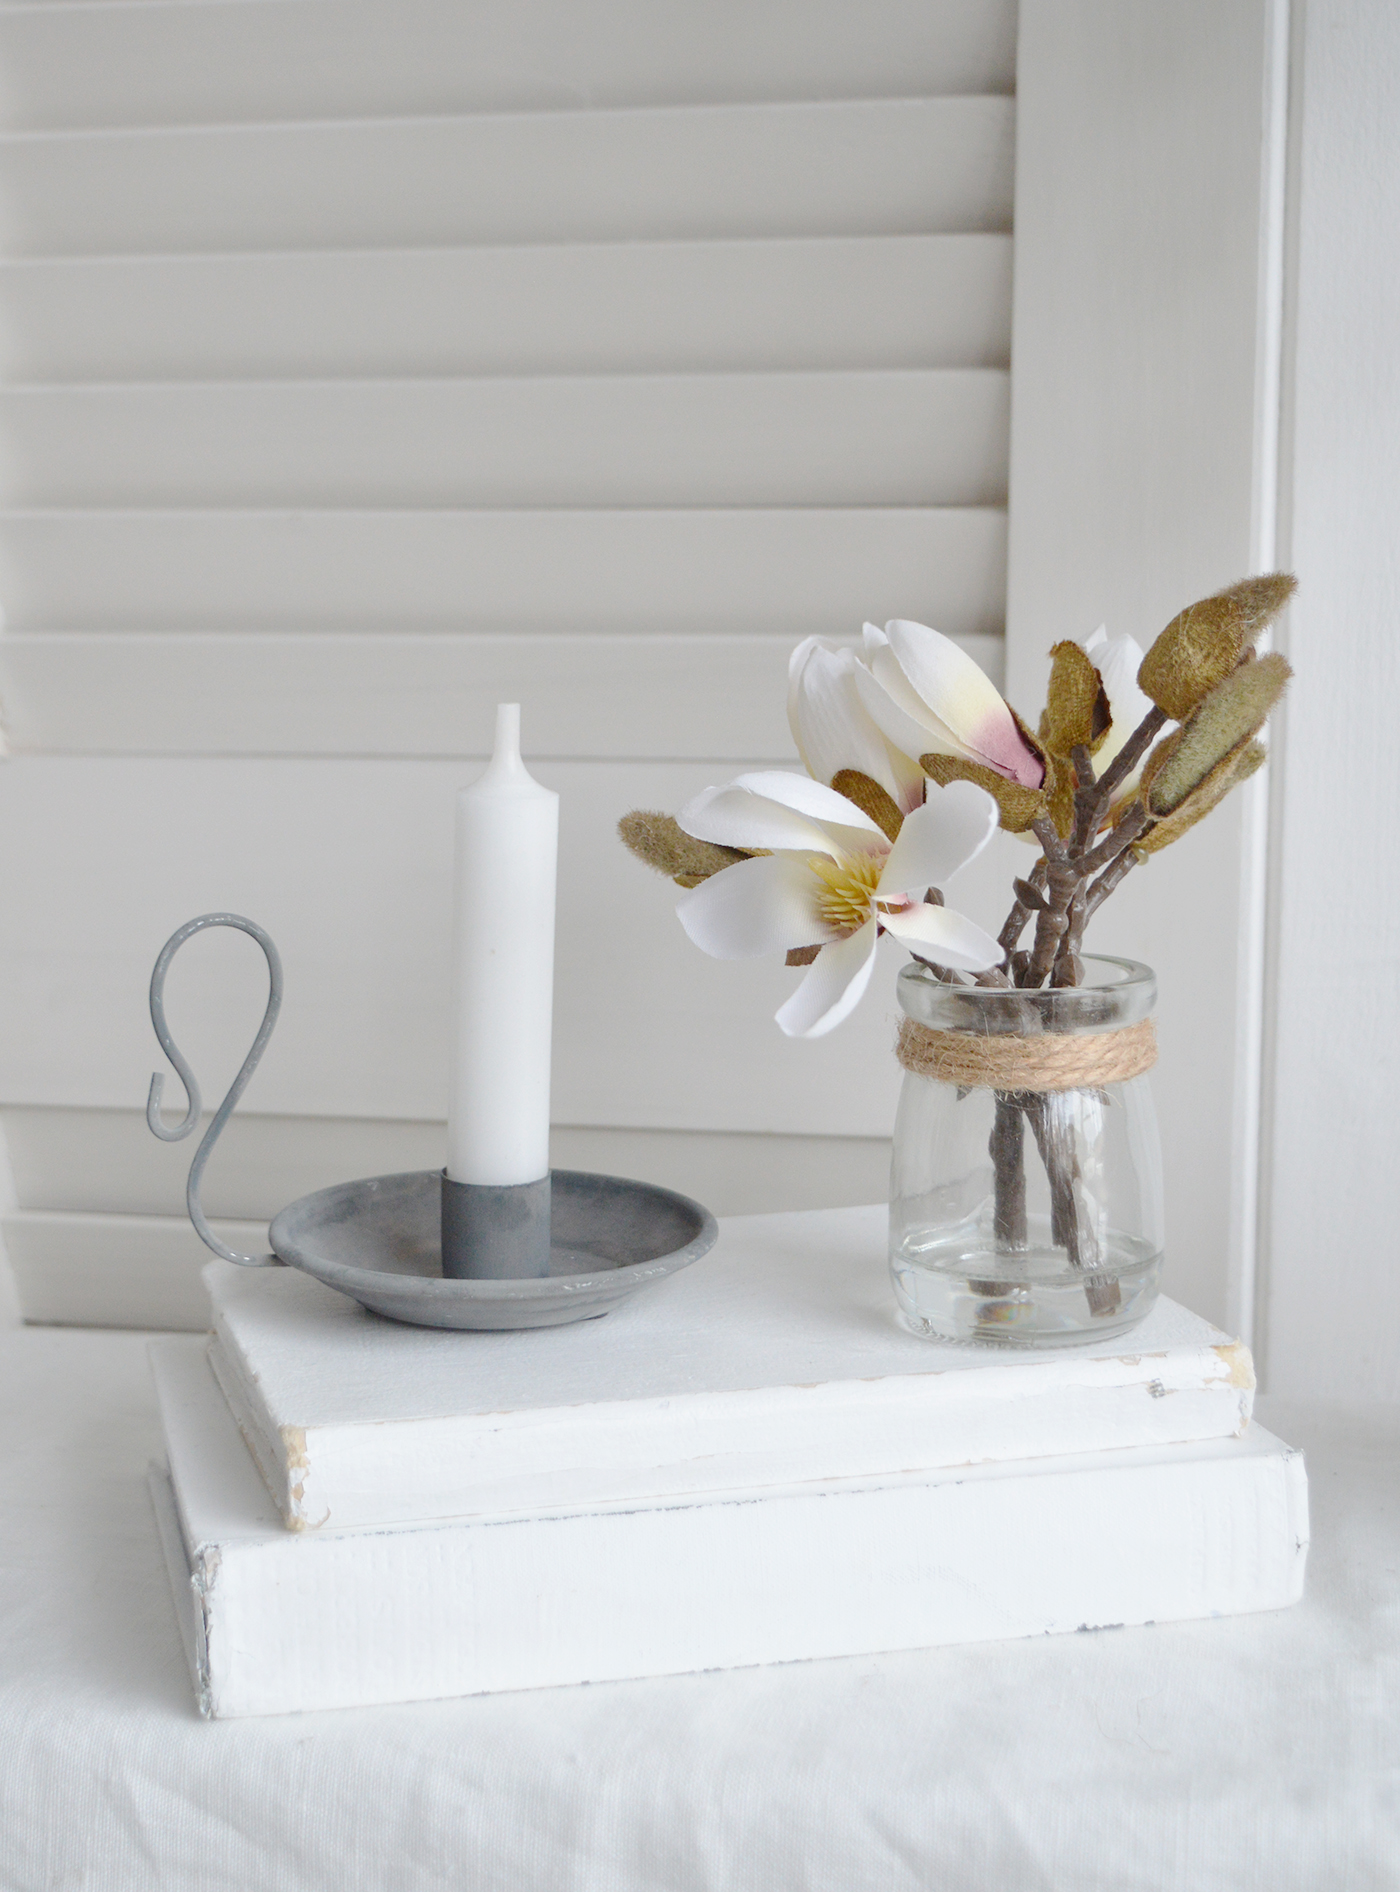 Faux Magnolia Sprig in Pot - Styling New England Country, modern Farmhouswe and Coastal Homes and Interiors